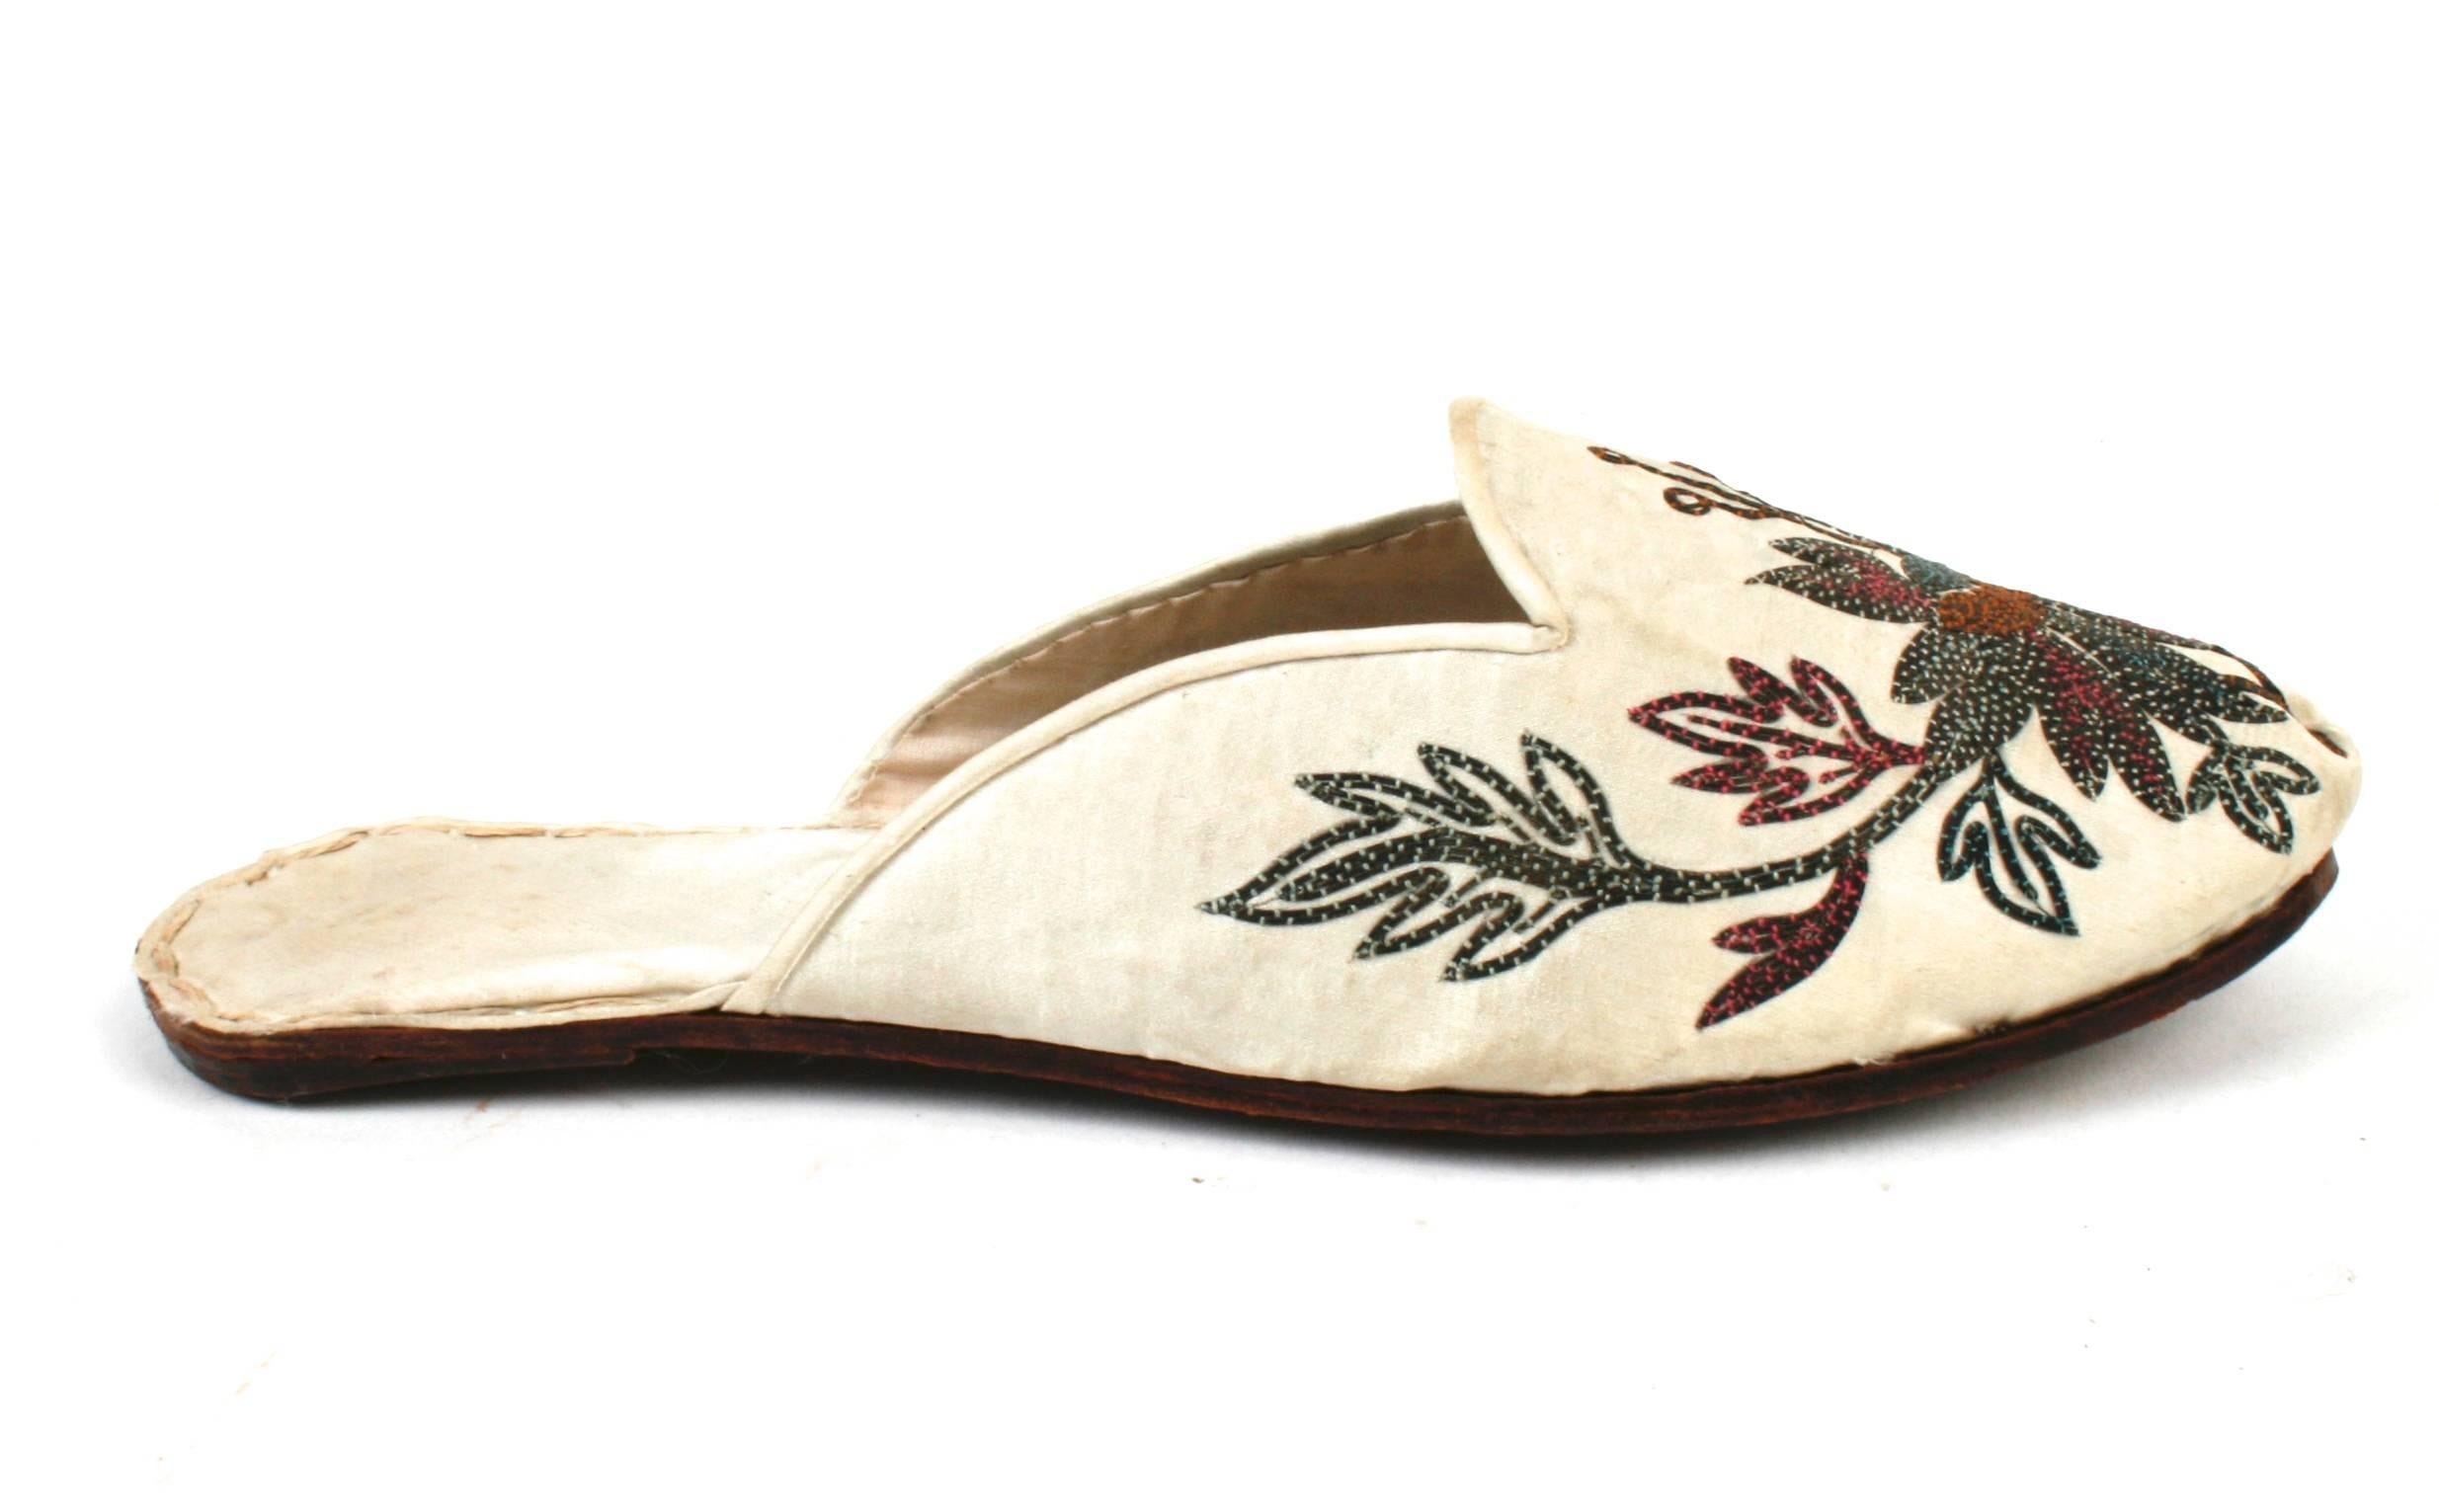 Handmade Indian ivory silk floral embroidered flat-heeled mules with leather soles. Mules are trimmed in a dark green and brick colored embroidery with self covered piping and lined in a matching ivory silk brocade. The leather soles have brass nail